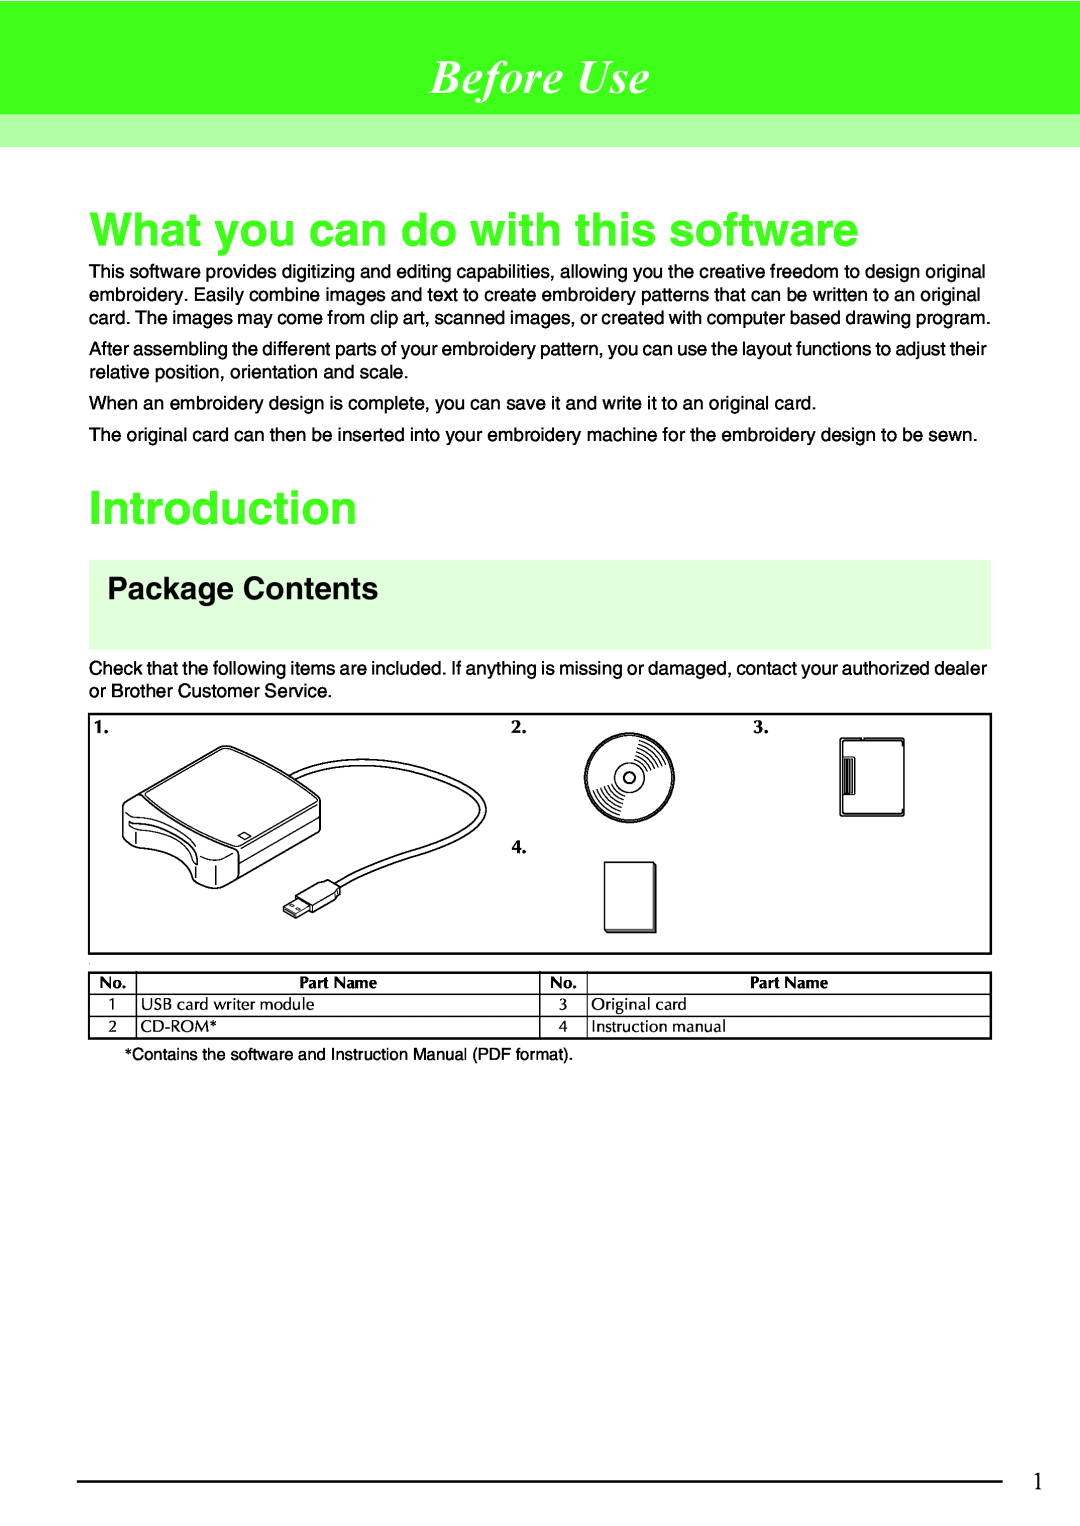 Brother Brother USB Writer, PE-DESIGN manual Before Use, What you can do with this software, Introduction, Package Contents 